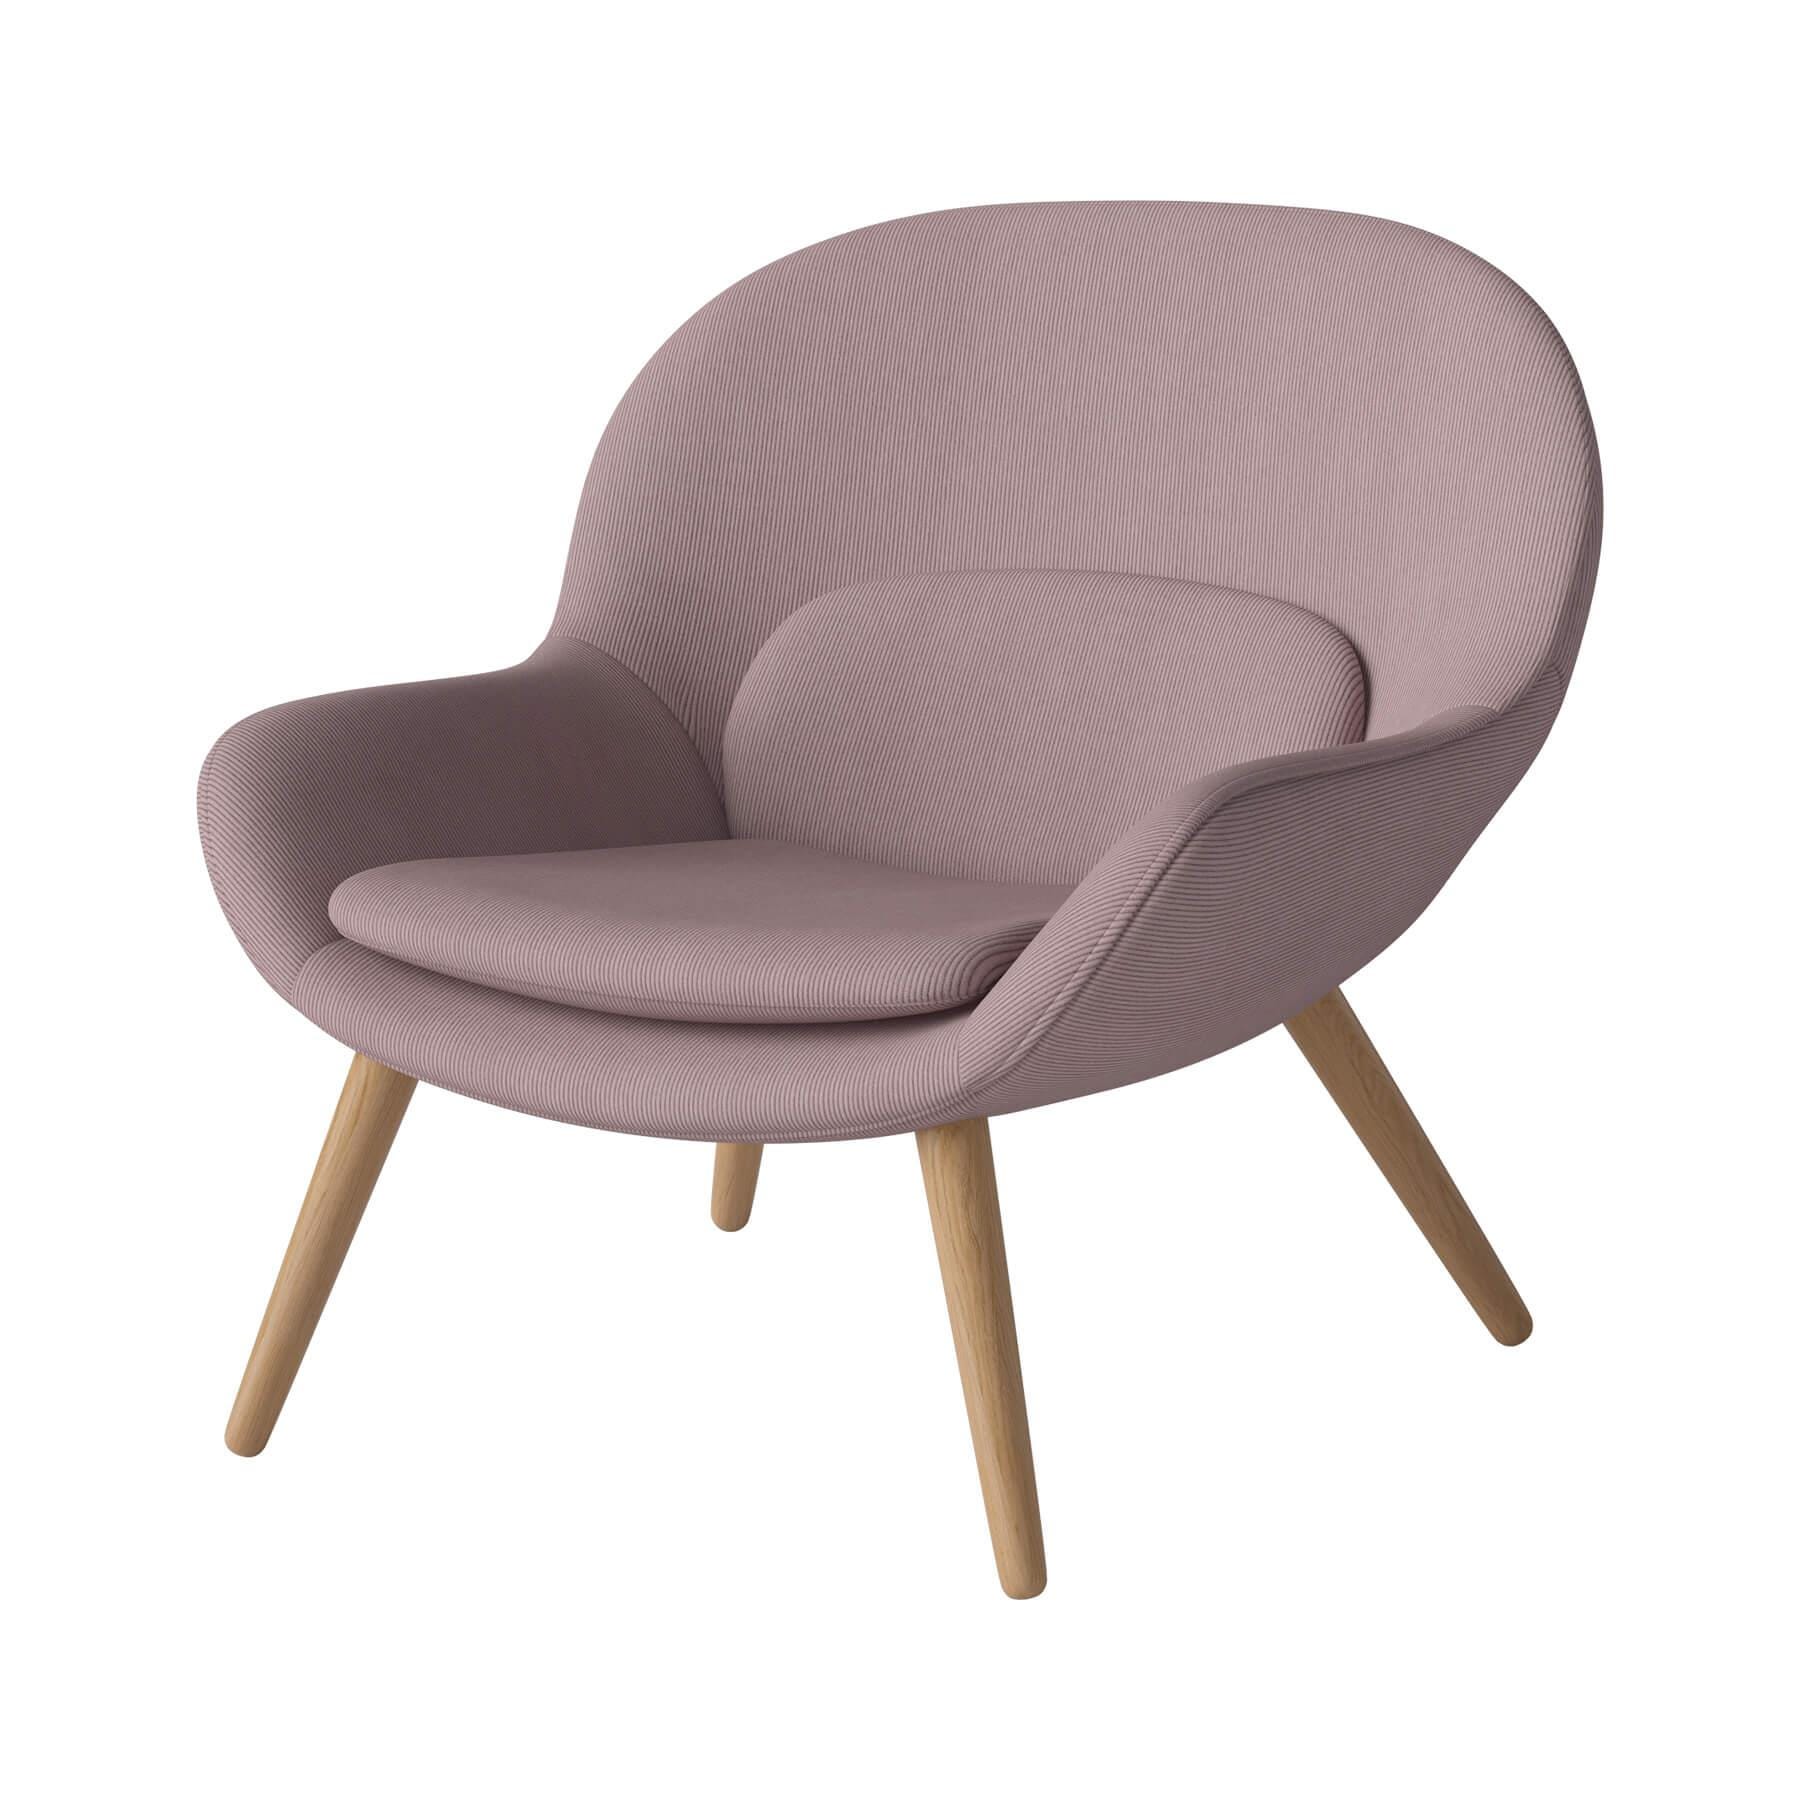 Bolia Philippa Armchair Oiled Oak Linea Rosa Pink Designer Furniture From Holloways Of Ludlow